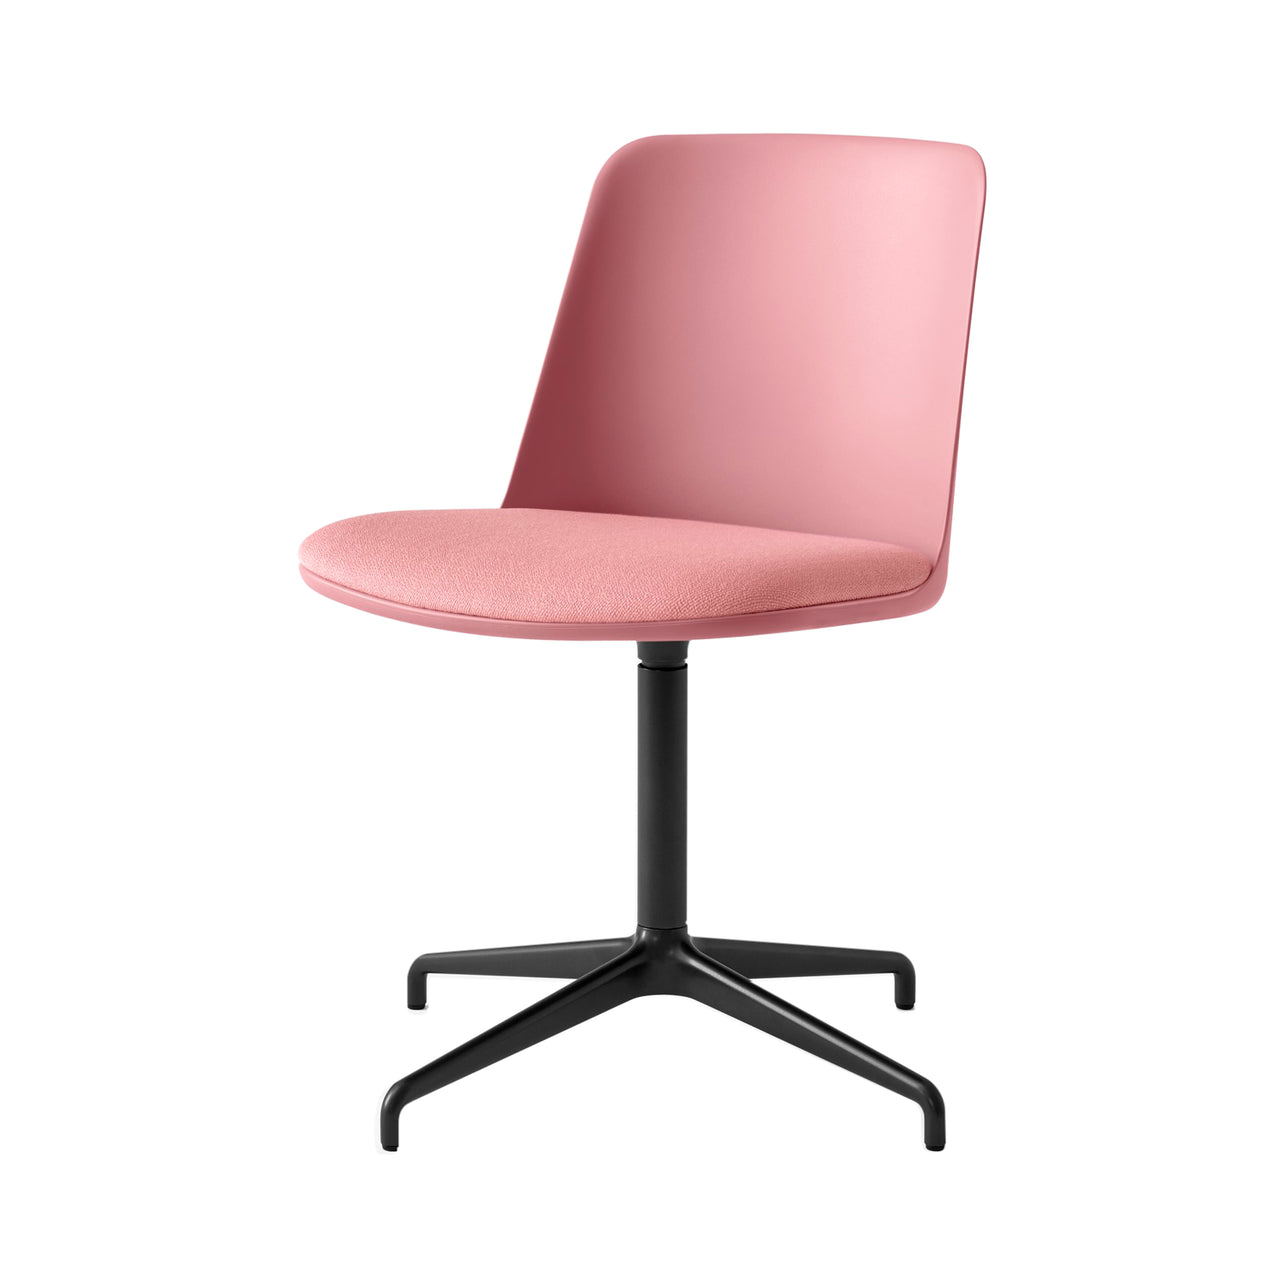 Rely Chair HW12: Soft Pink + Black